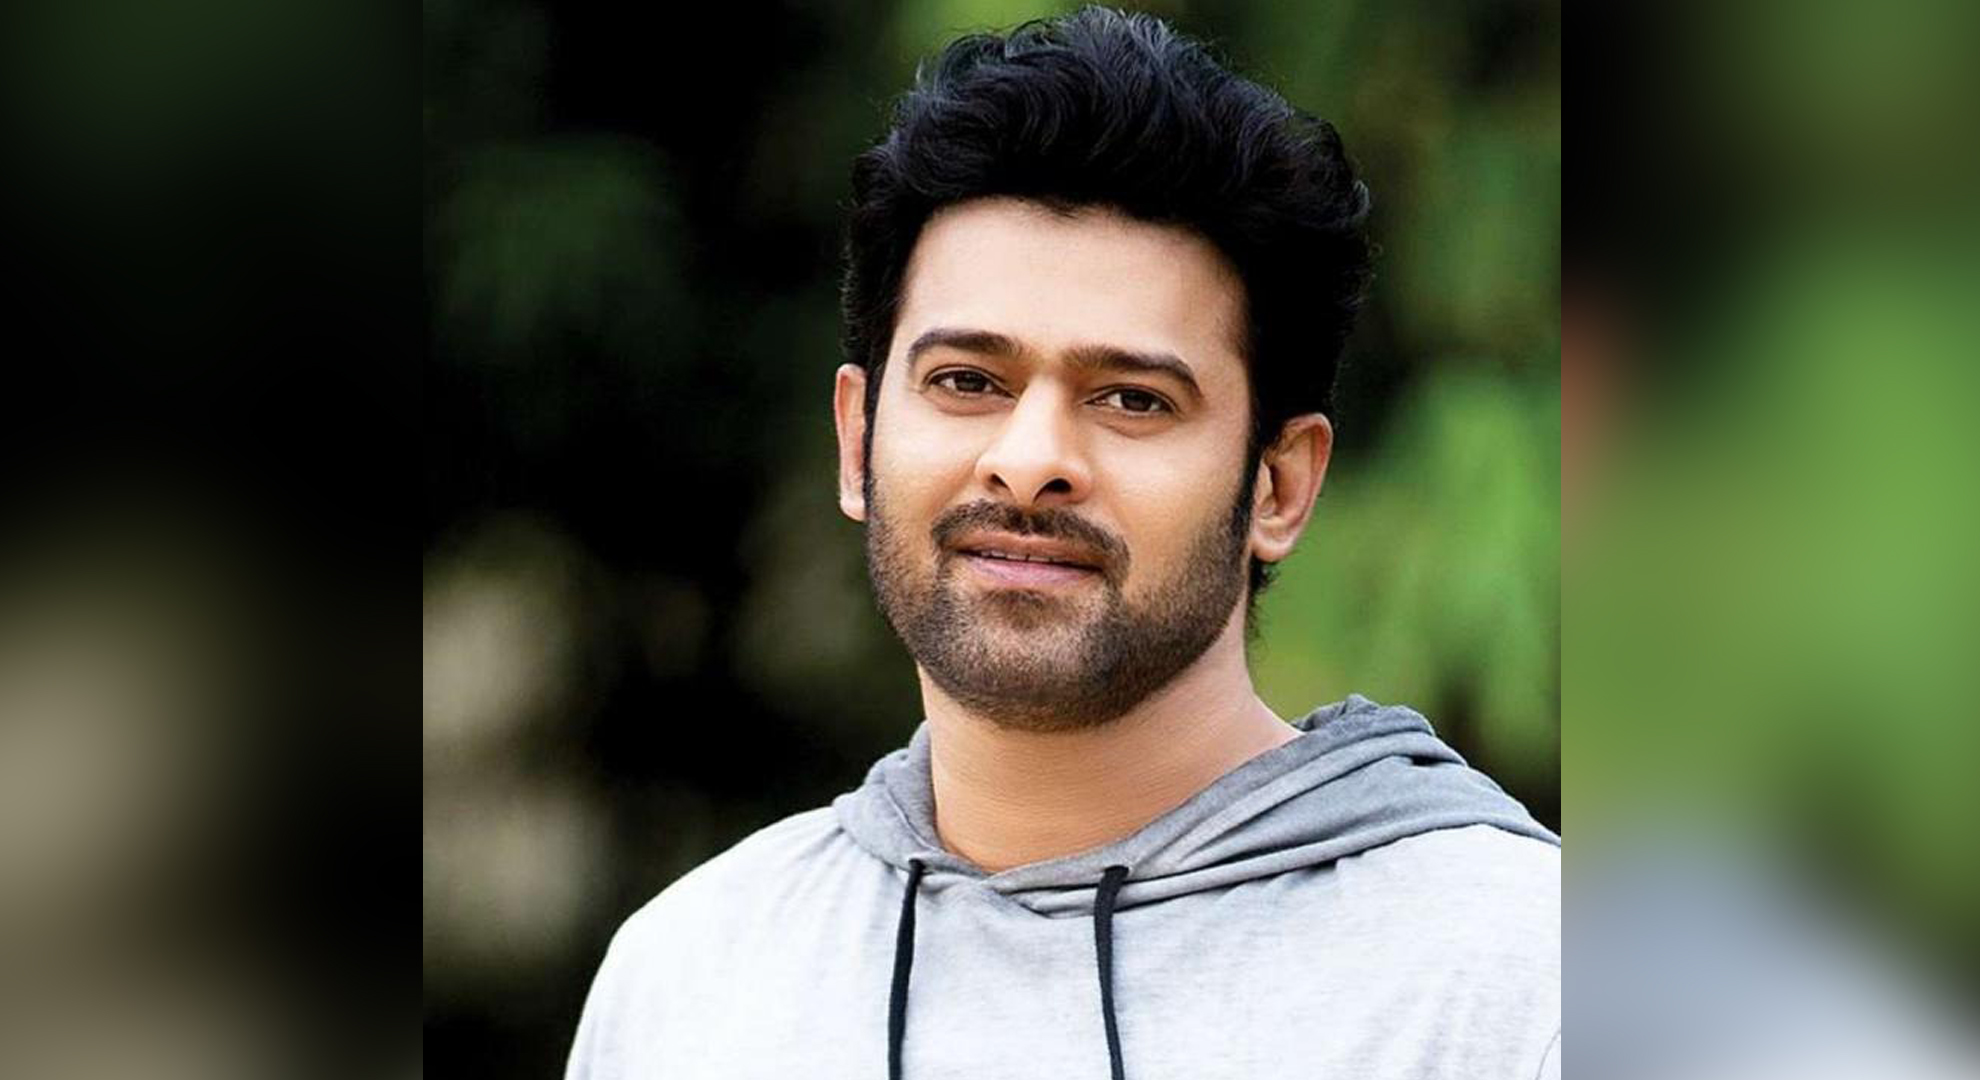 Prabhas’ fans were so excited for his 20th film that they named it ‘Jaan’, before the official announcement!